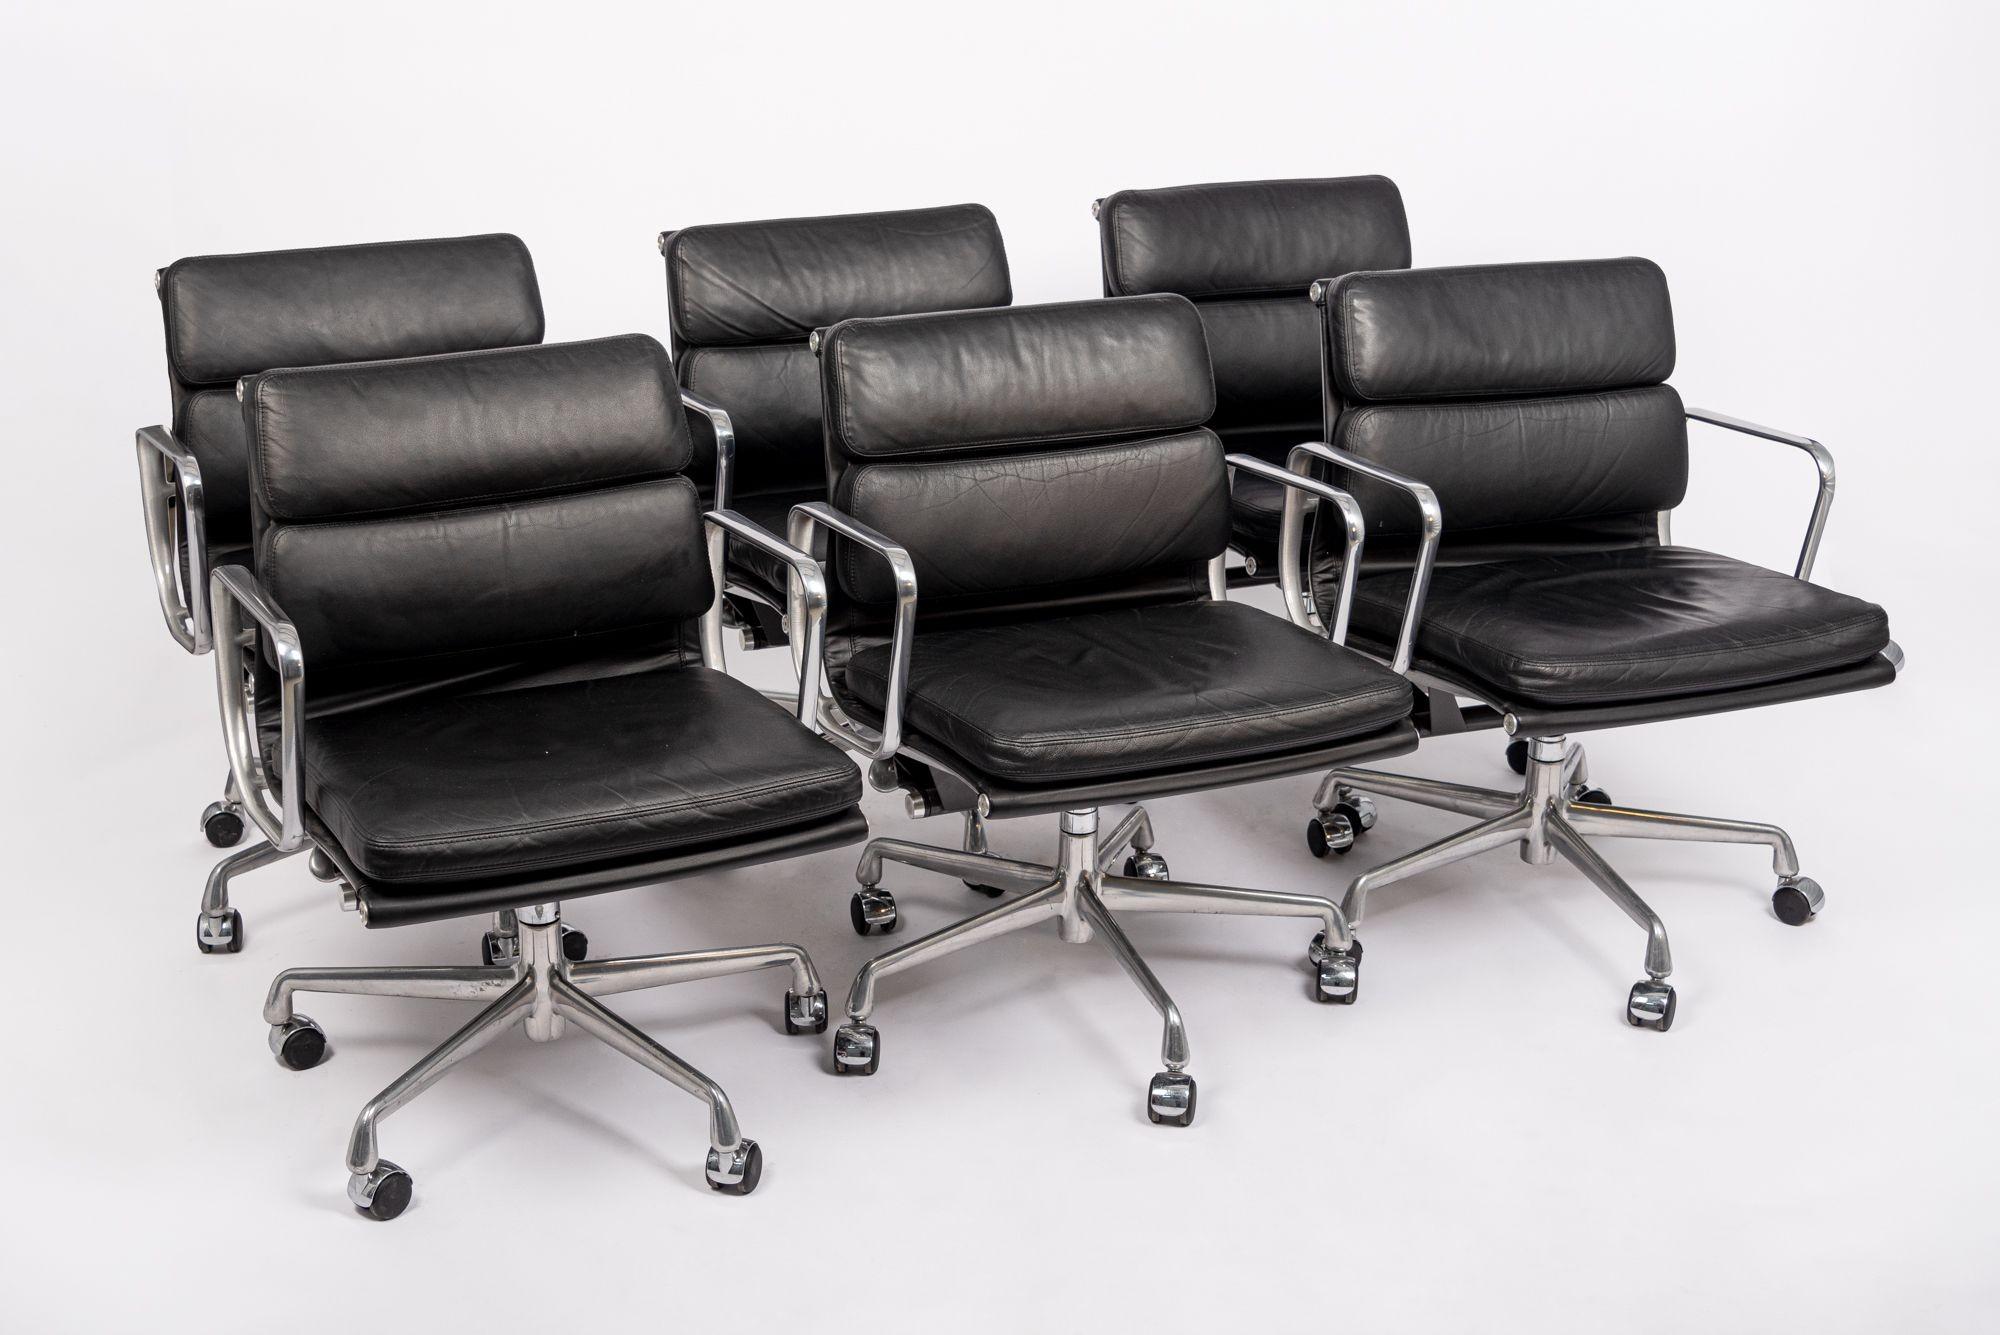 2001 Eames Herman Miller Black Leather Desk Chairs Aluminum Group For Sale 3